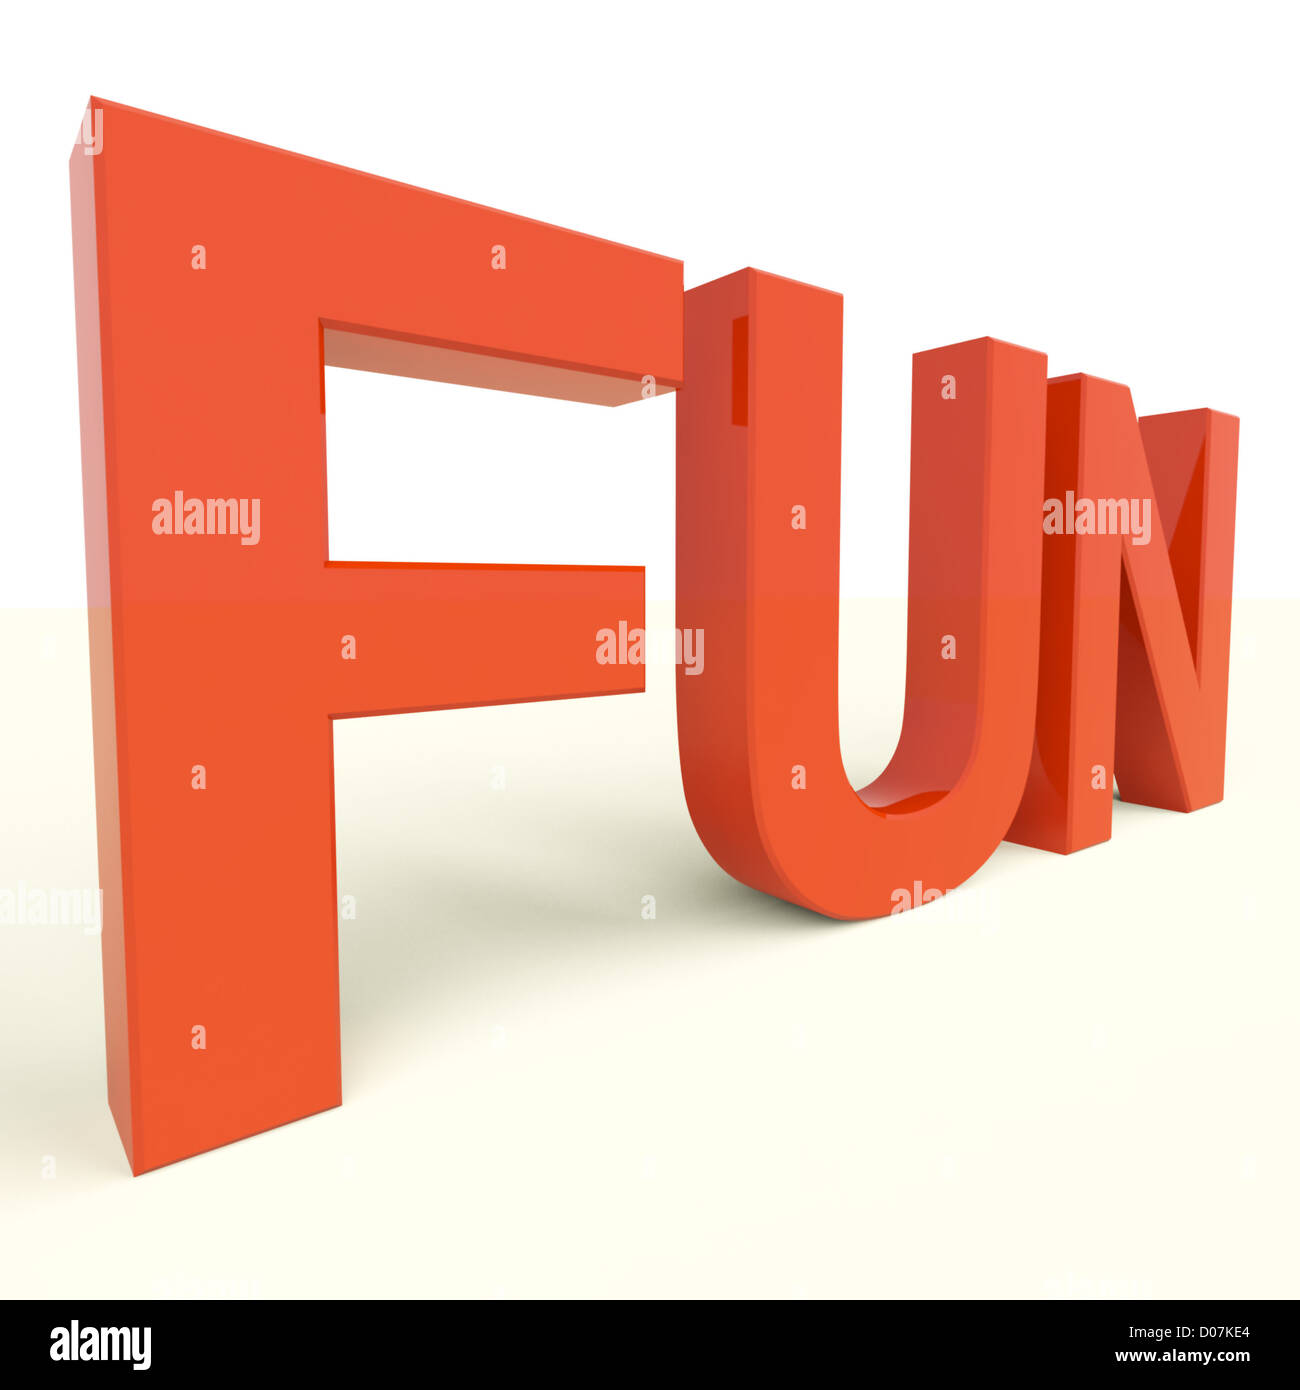 Fun Word In Red Plastic Letters For Enjoyment And Happiness Stock Photo